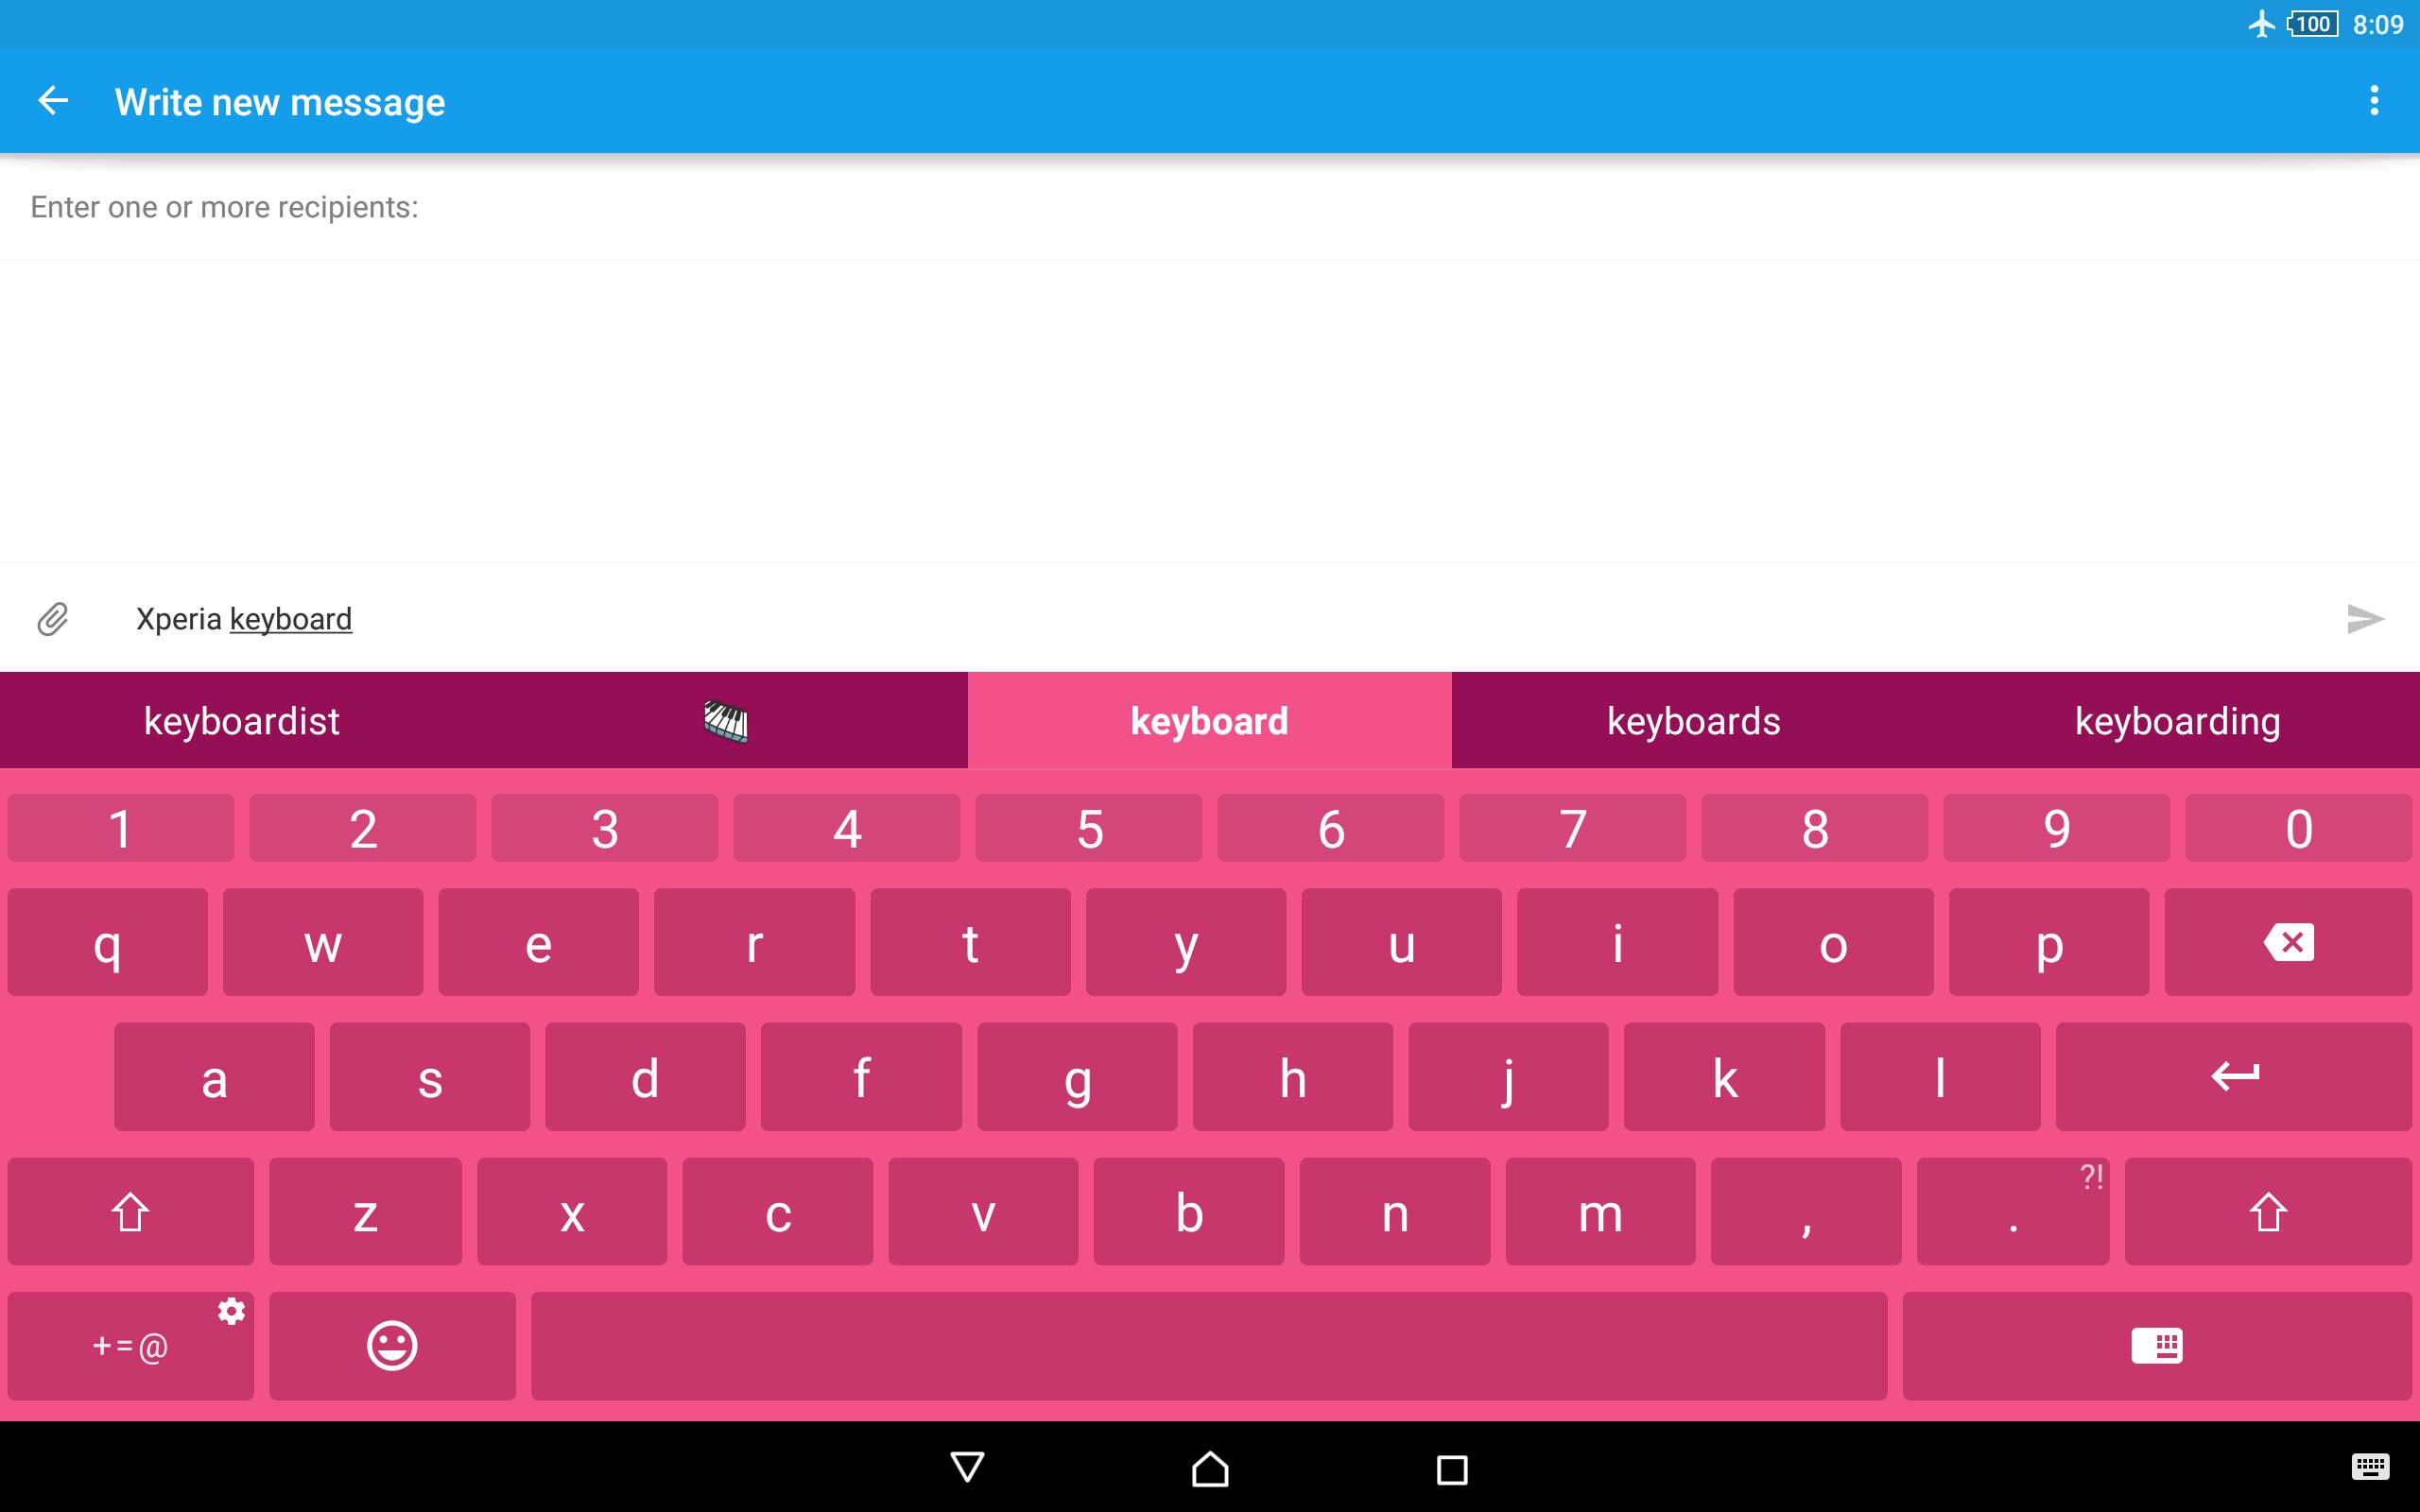 Xperia Keyboard for Android - APK Download